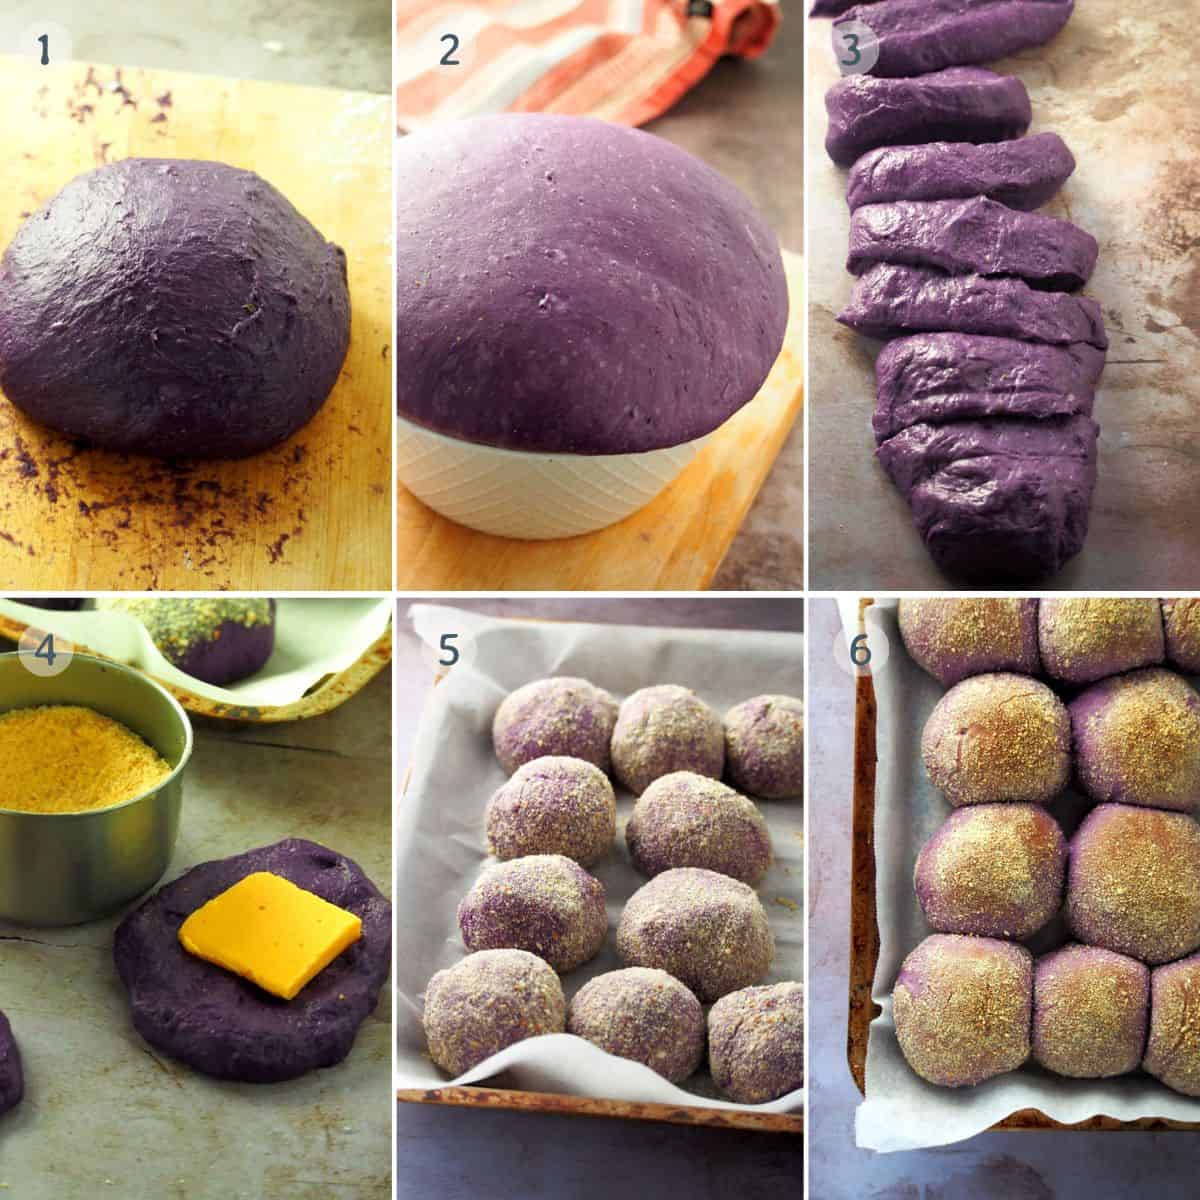 kneading, proofing, assembling, and baking ube cheese pandesal.